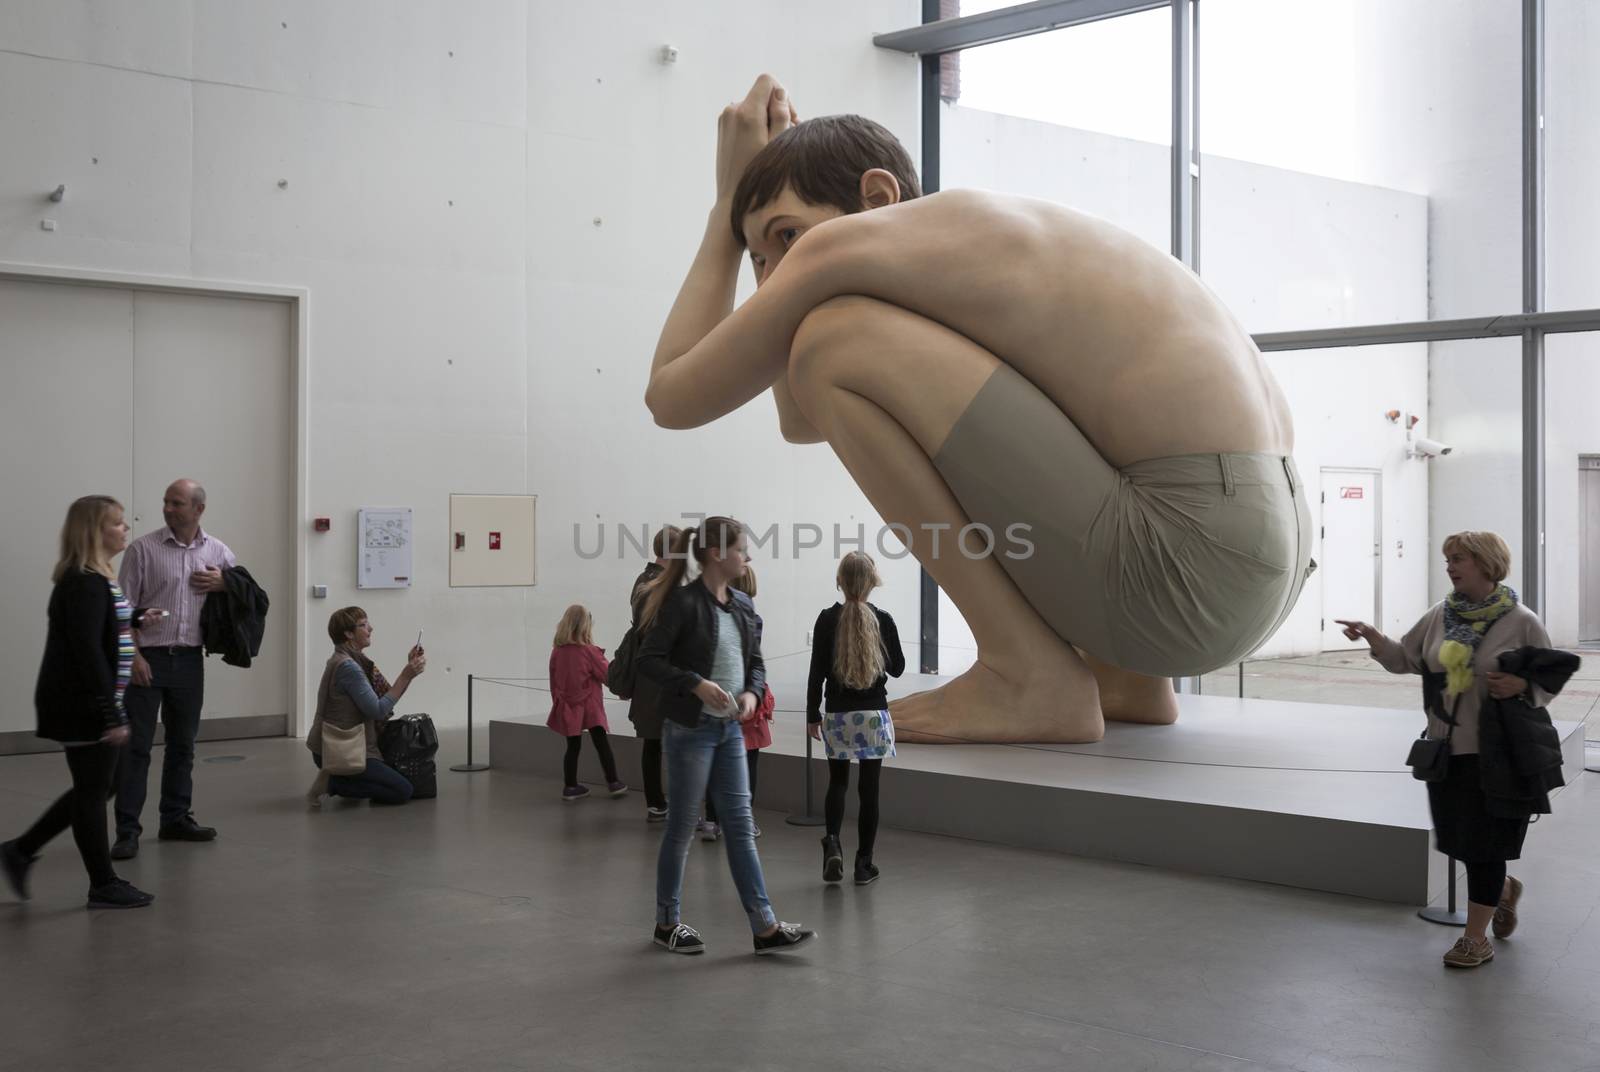 AARHUS, DENMARK - MAY 25: Boy made of the Australian sculptor Ron Mueck exhibited in Aros - The art Museum of Aarhus, Denmark May 25, 2013. Ron Mueck has made fine art since 1996.